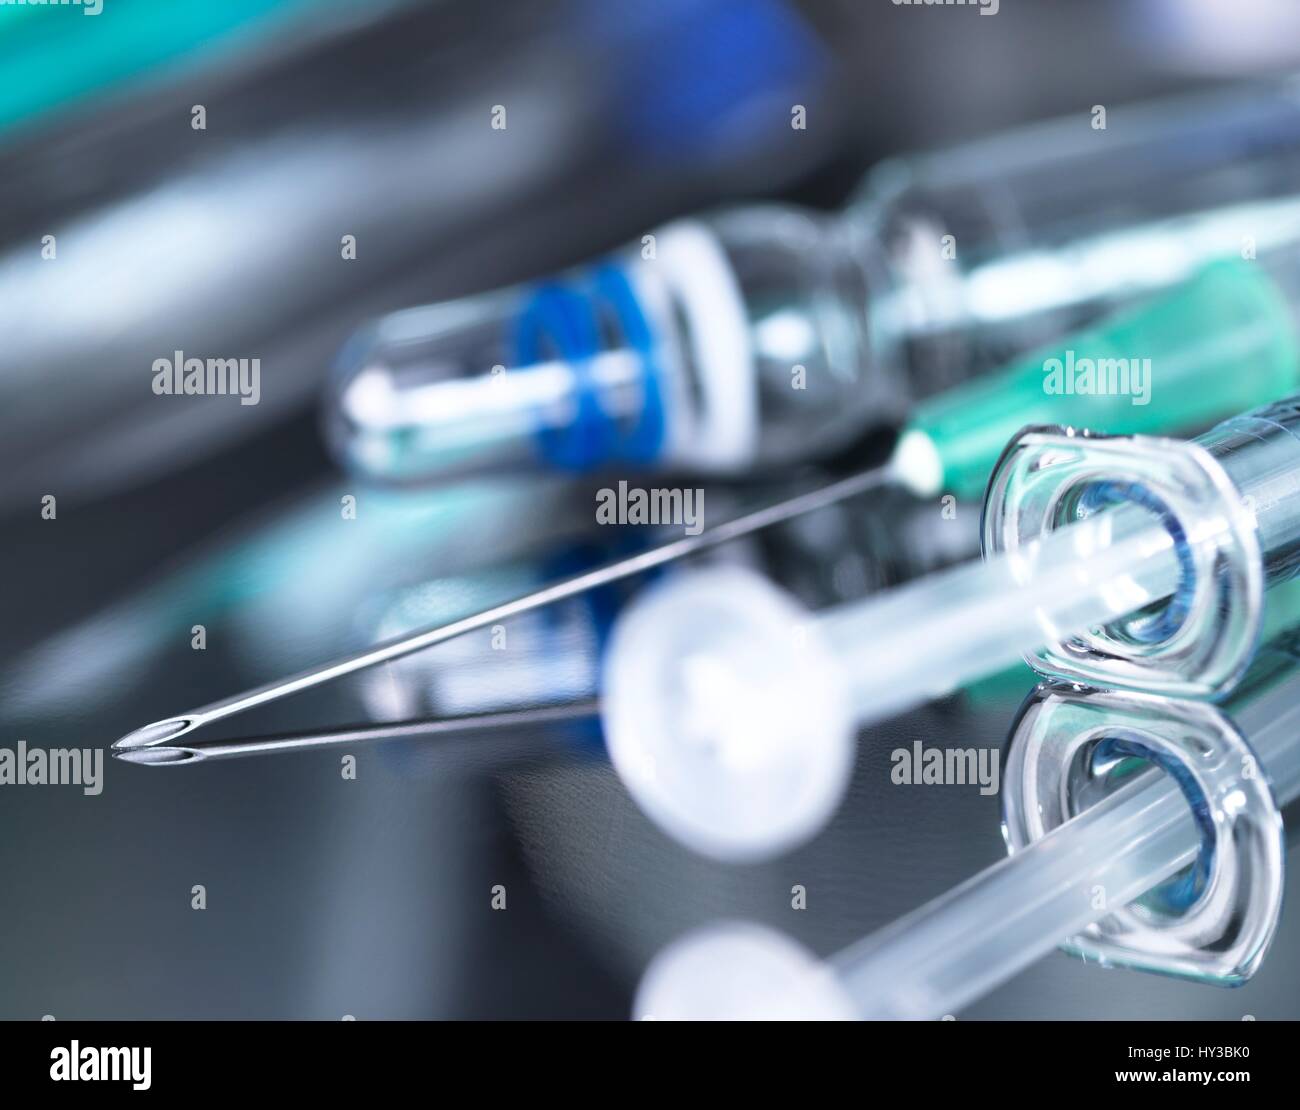 Close up of a syringe and vaccines on a surgical tray. Stock Photo